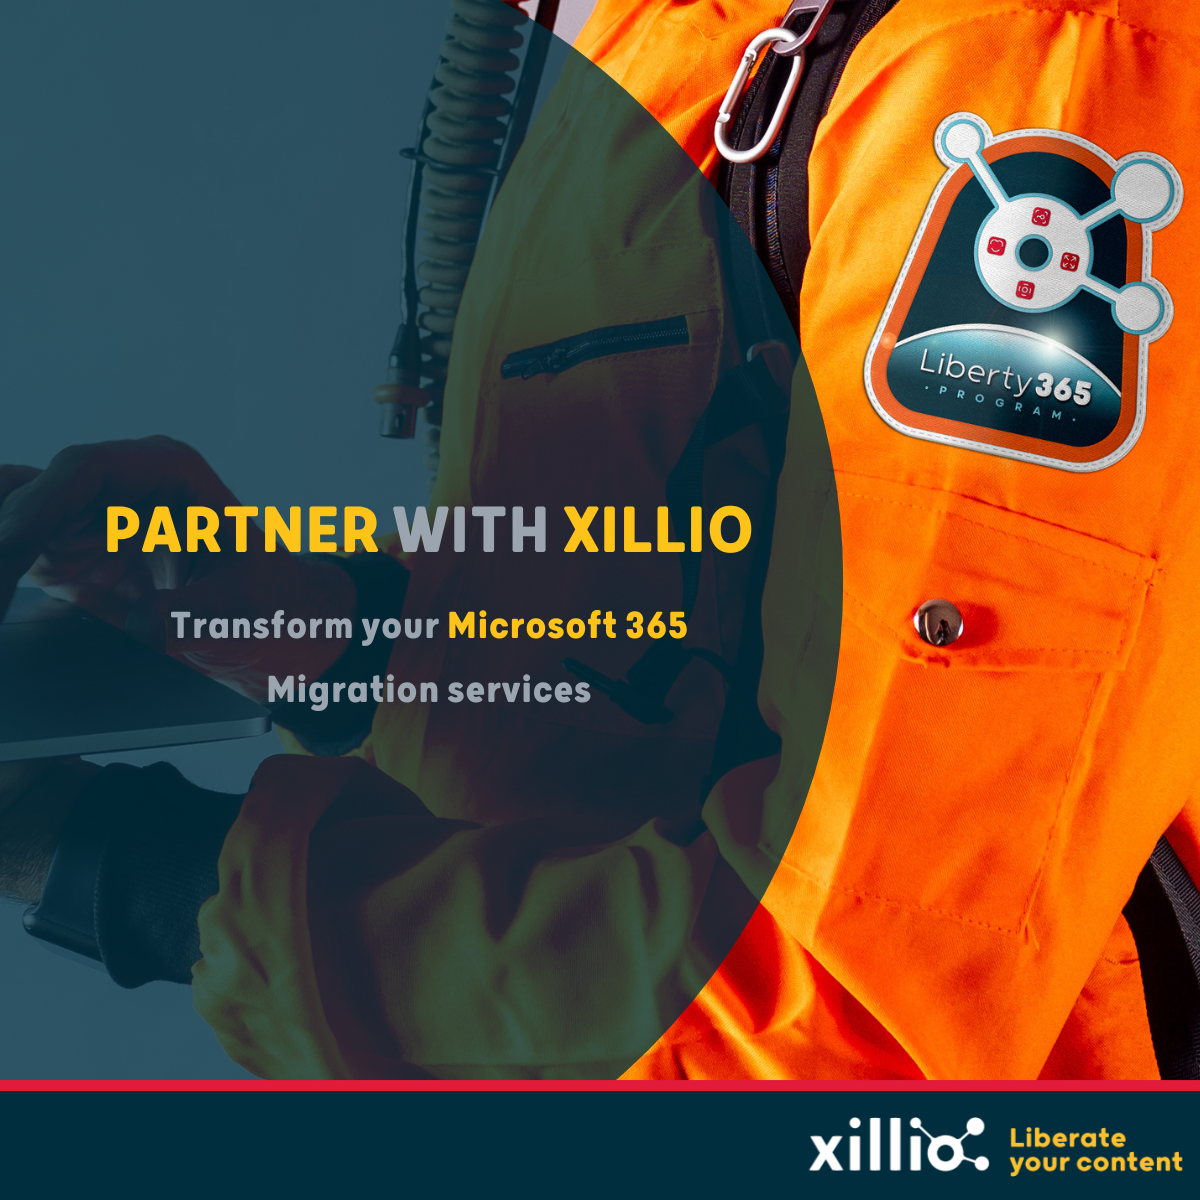 Partner with Xillio: transform your Microsoft 365 migration services